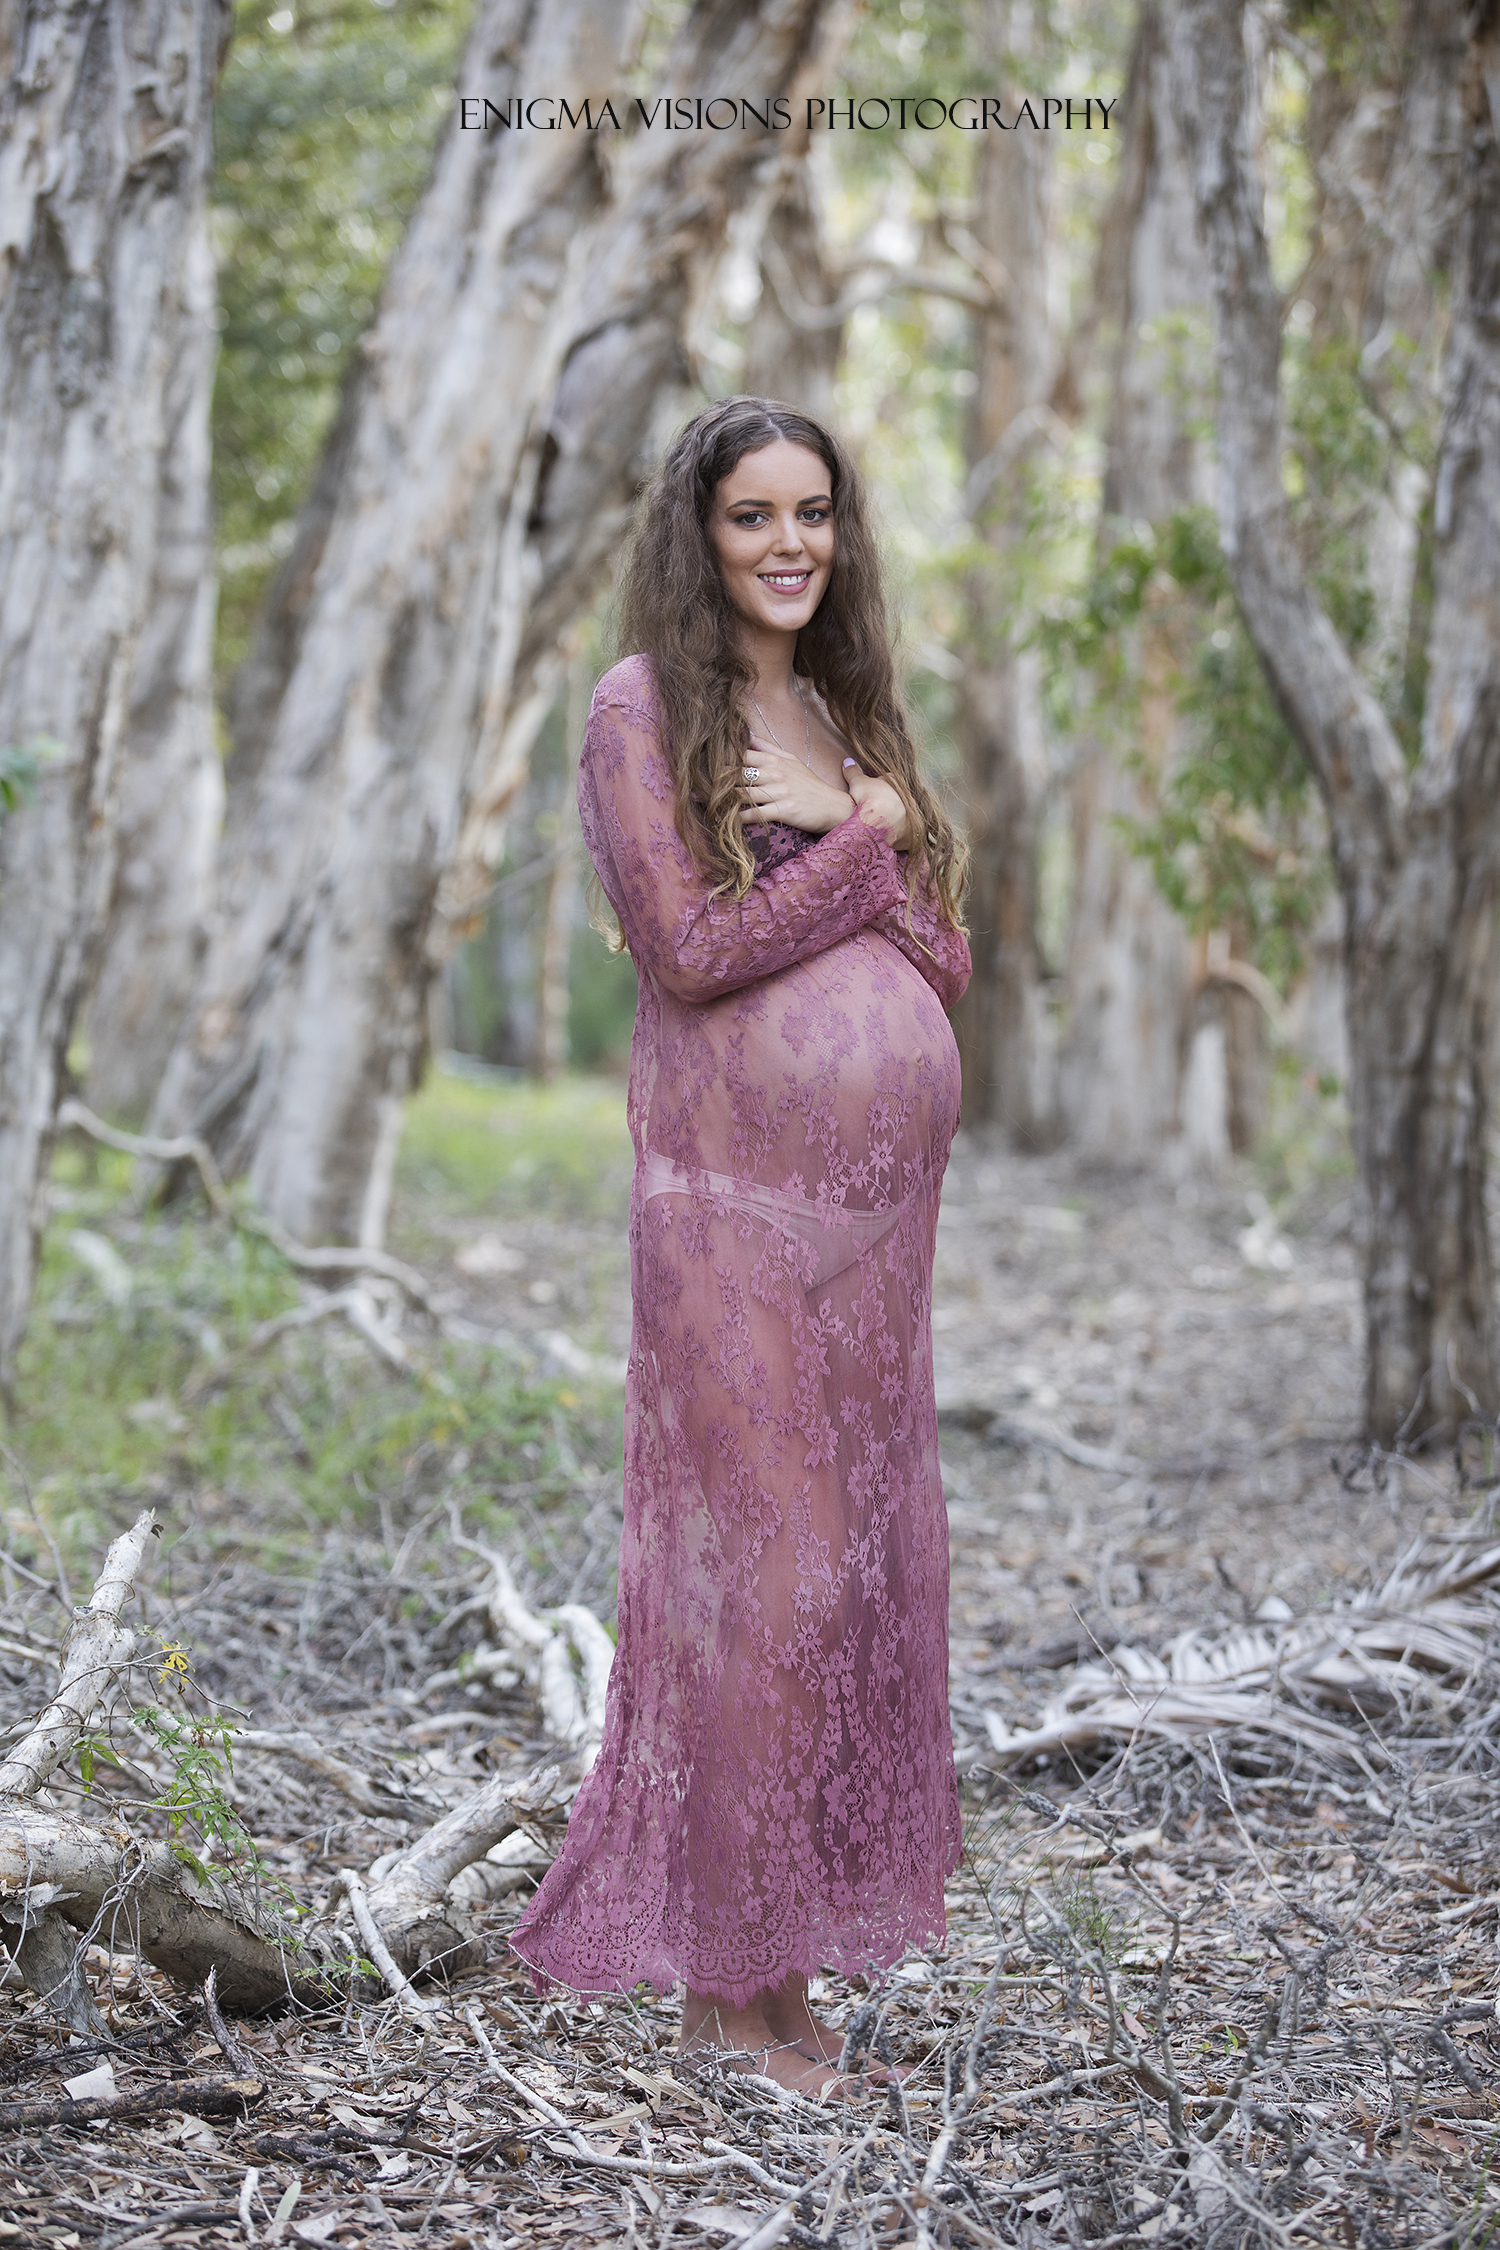 Enigma_Visions_Photography_Maternity_Mahlea014.jpg